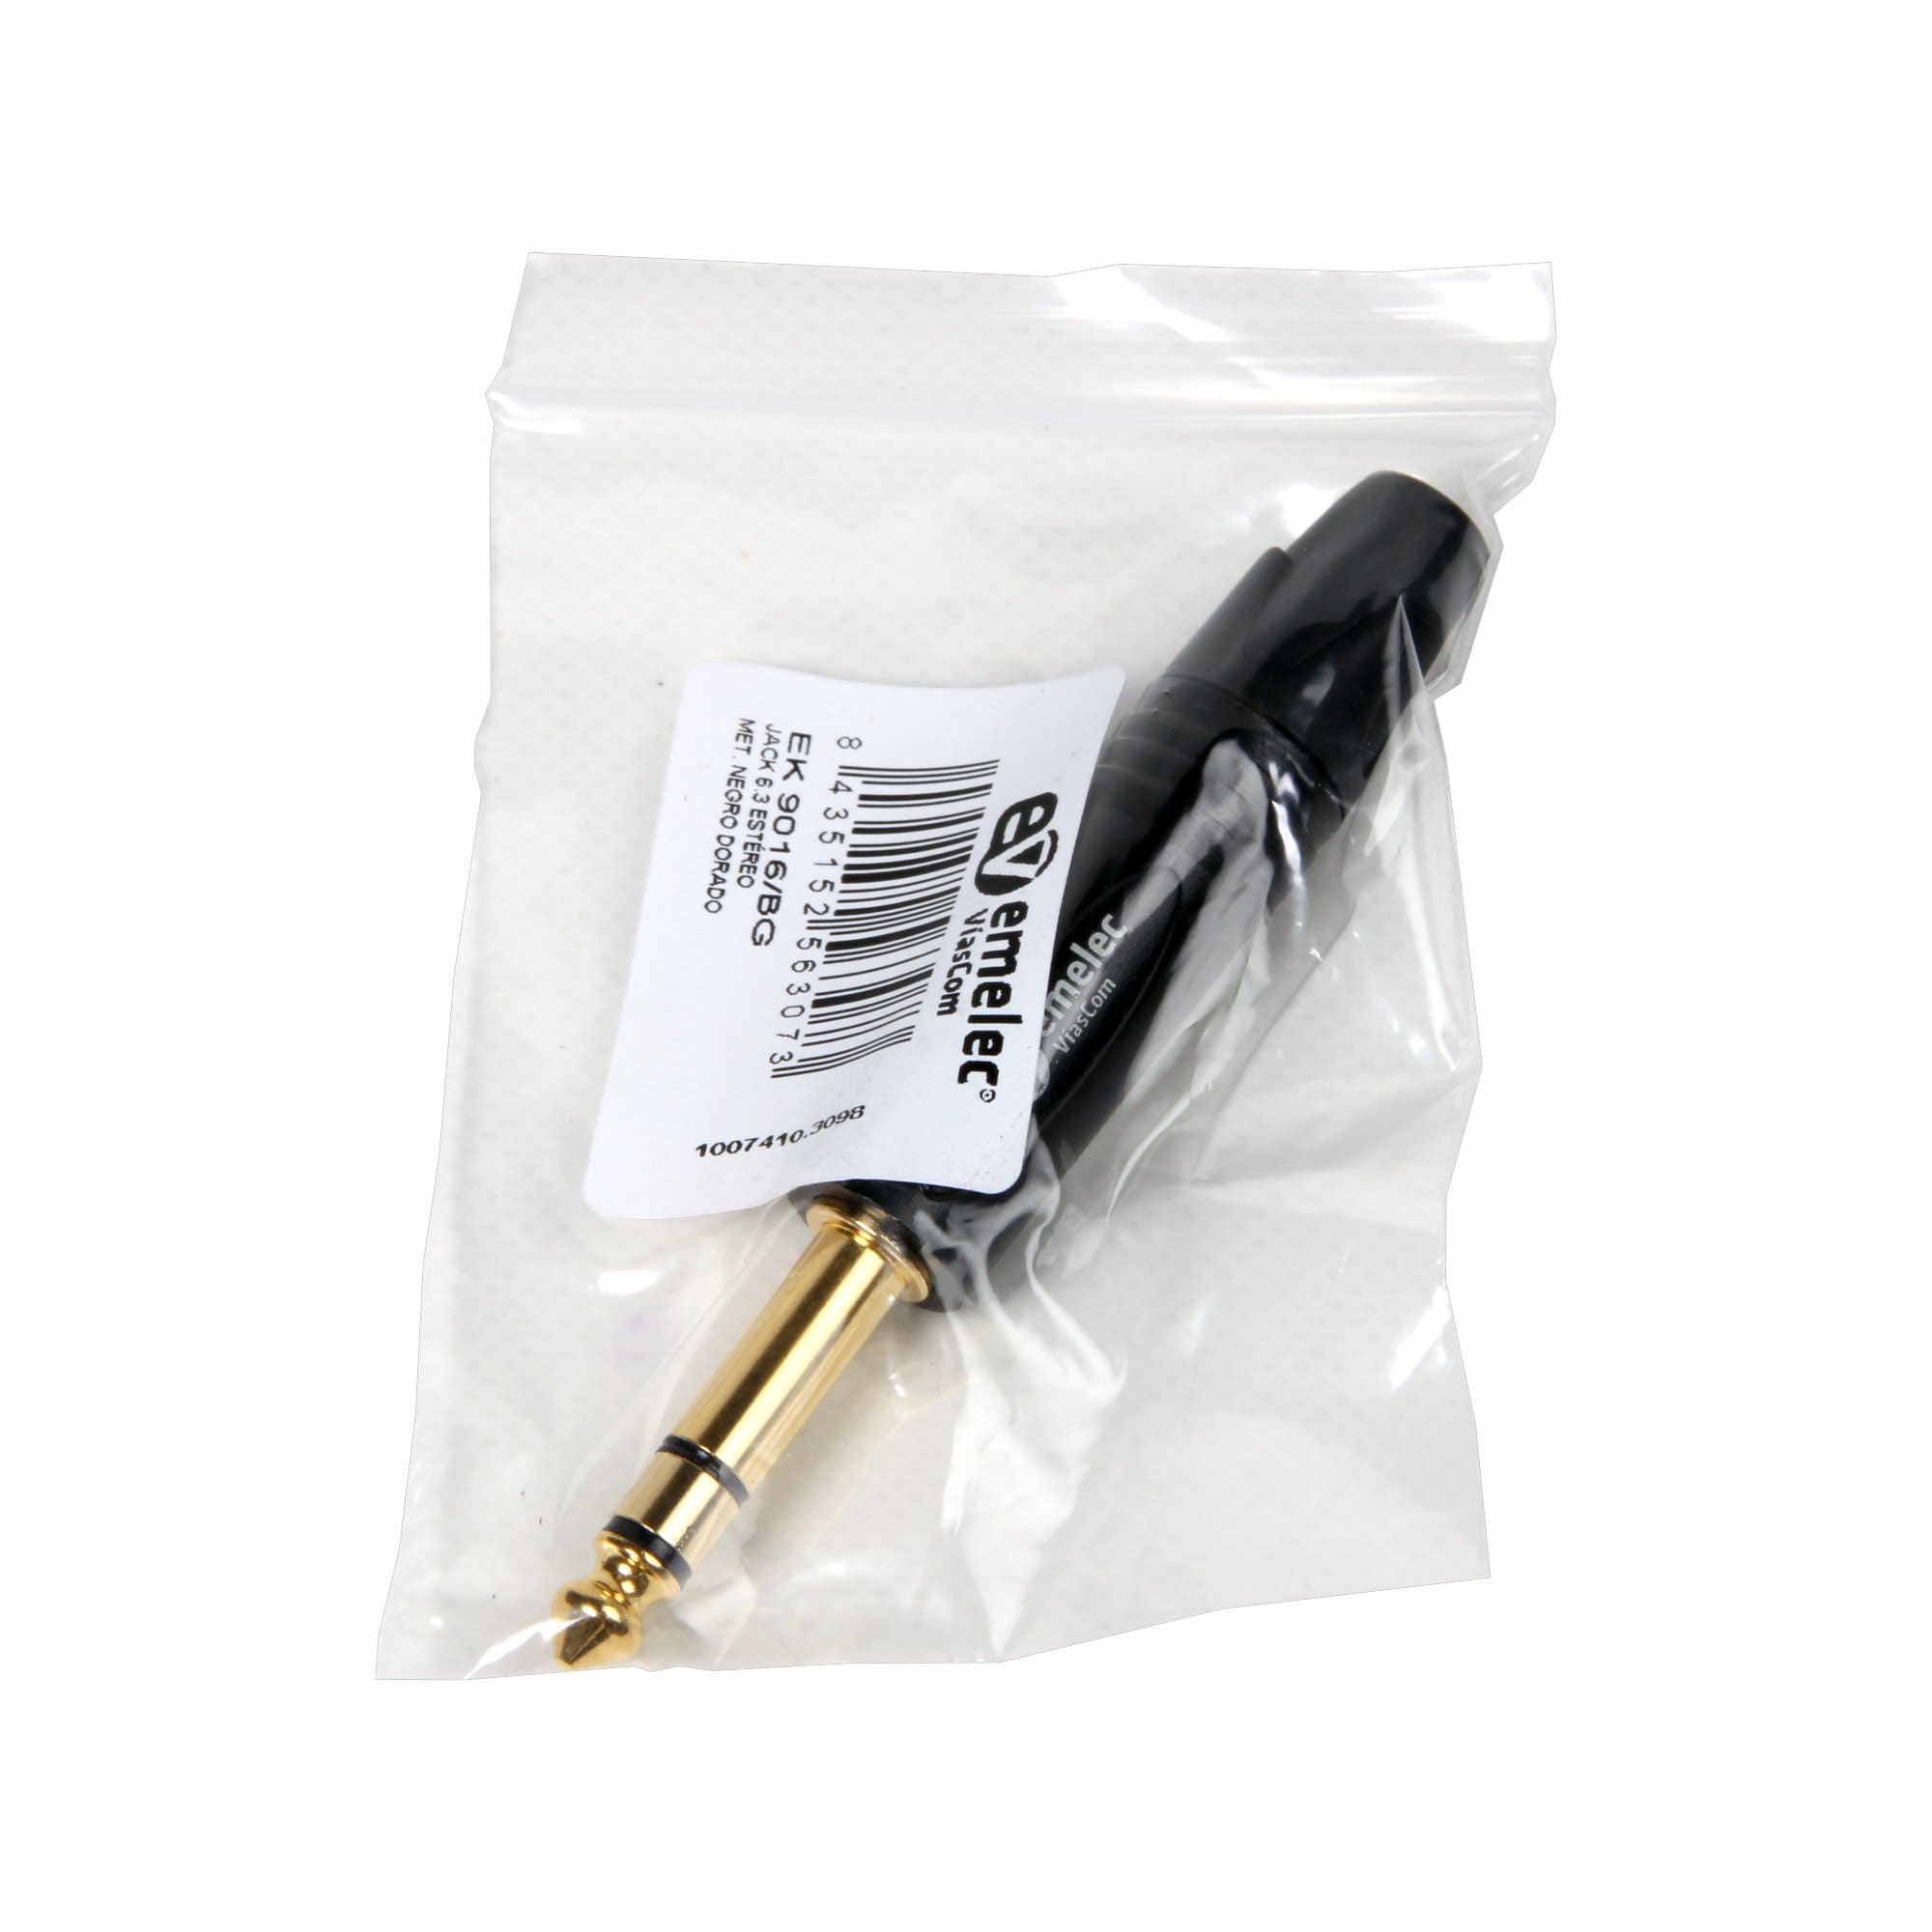 Individual plastic bag with gold and black stereo Jack 6.3 male connector of Emelec VíasCom